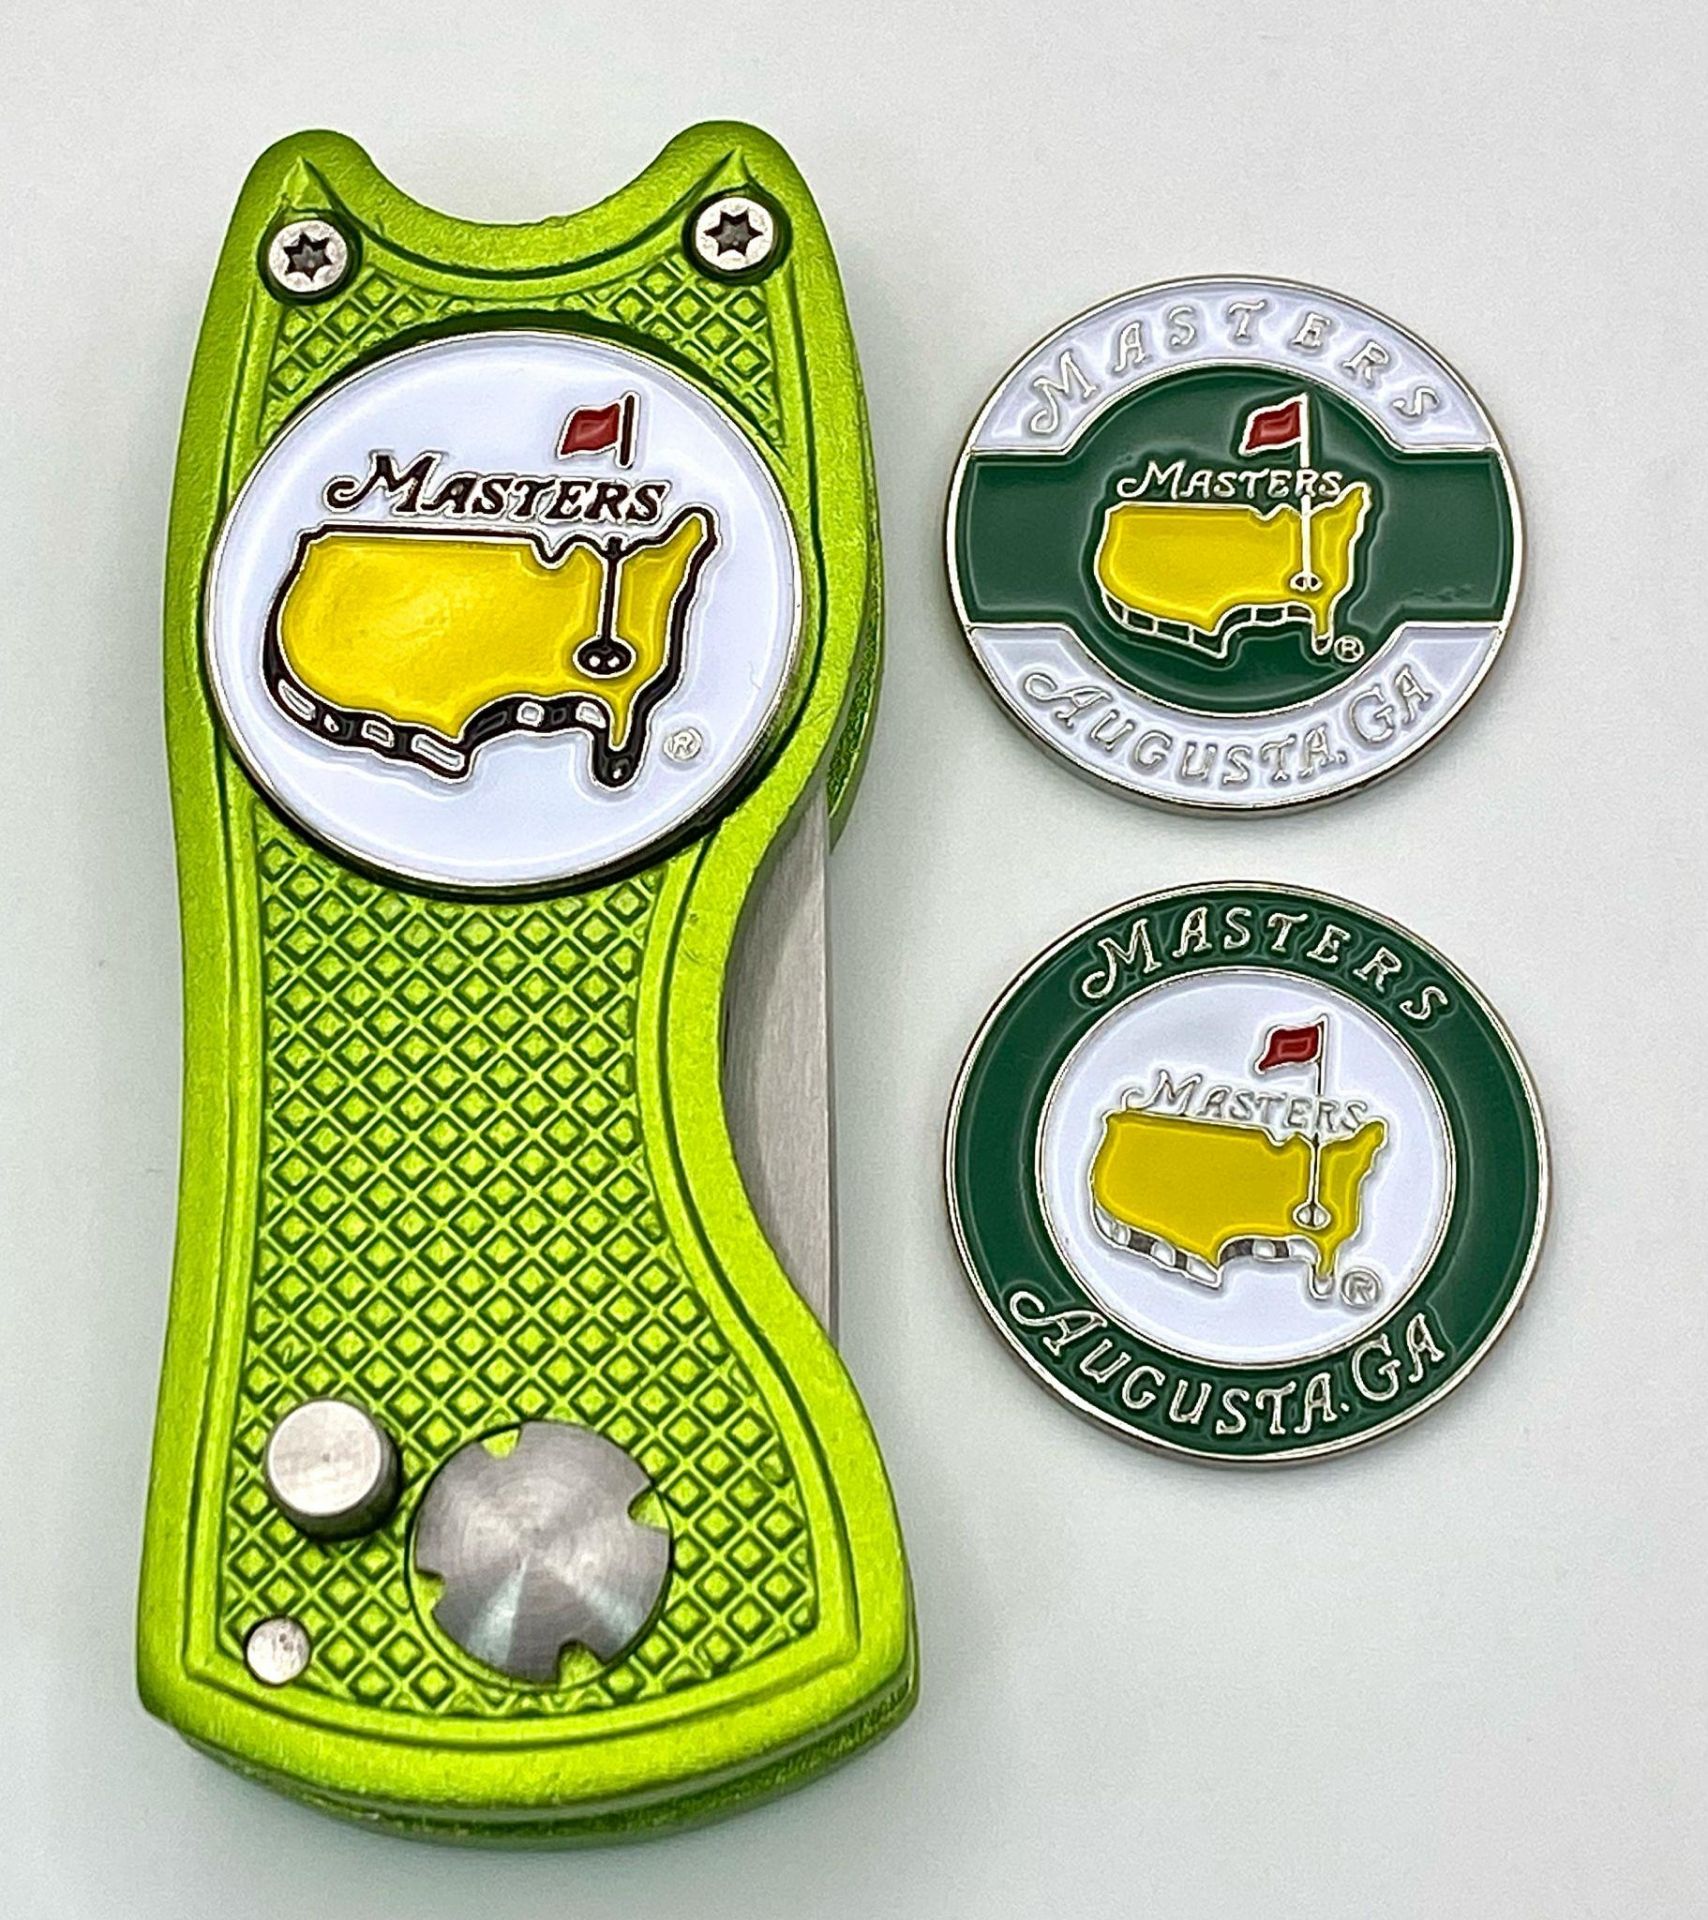 A Masters Golf Branded Putting Green "Flick Tool" Repair Kit - Comes with three commemorative - Bild 3 aus 4